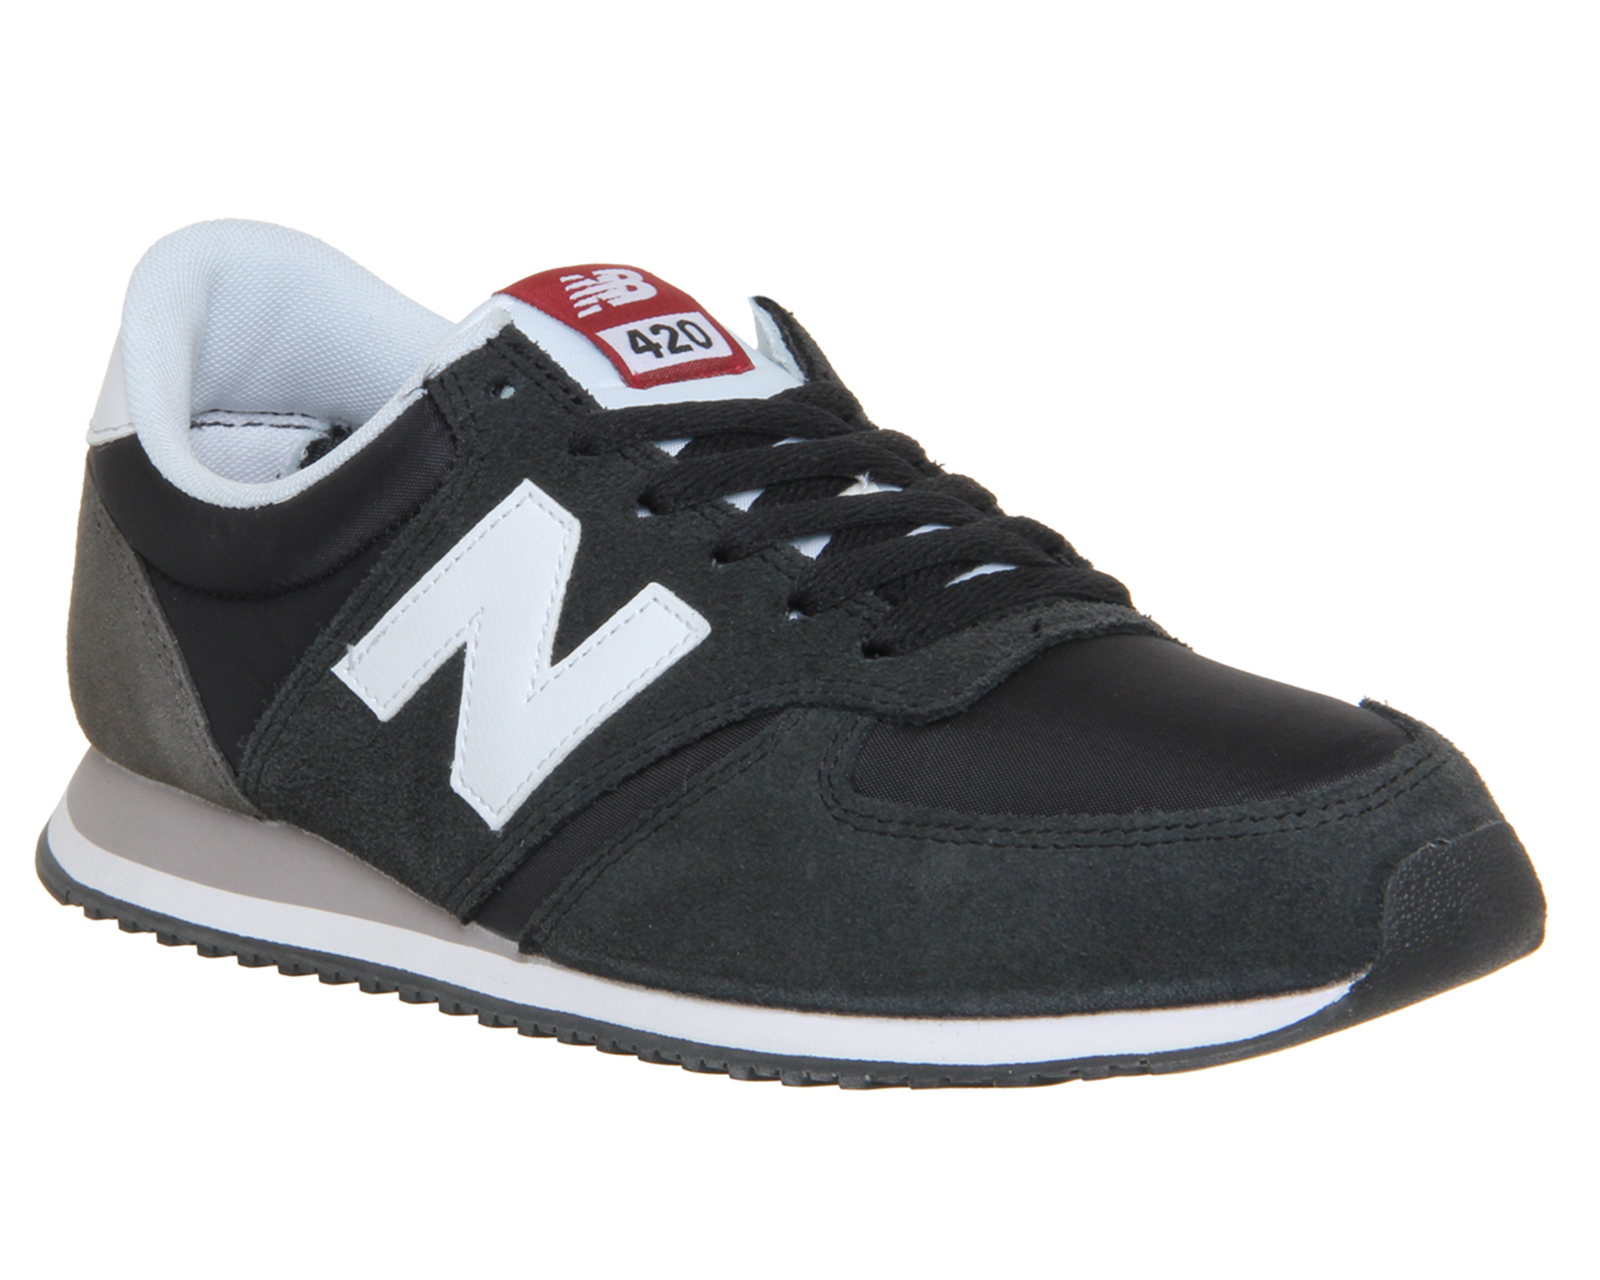 new balance 420 black and gray suede sneakers